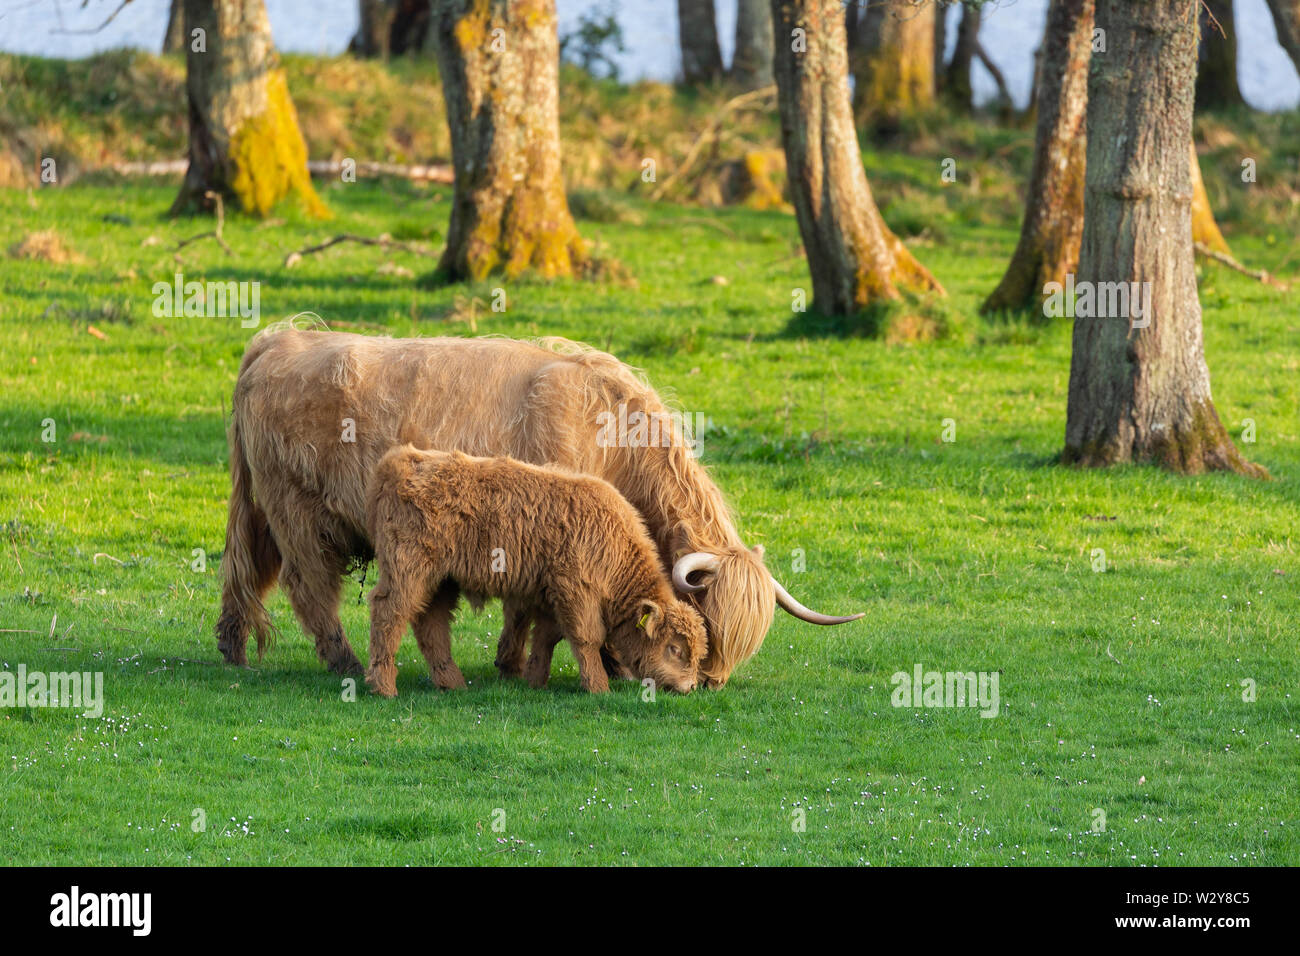 Highland cow and calf grazing with tree trunks in background, Highland Region, Scotland Stock Photo